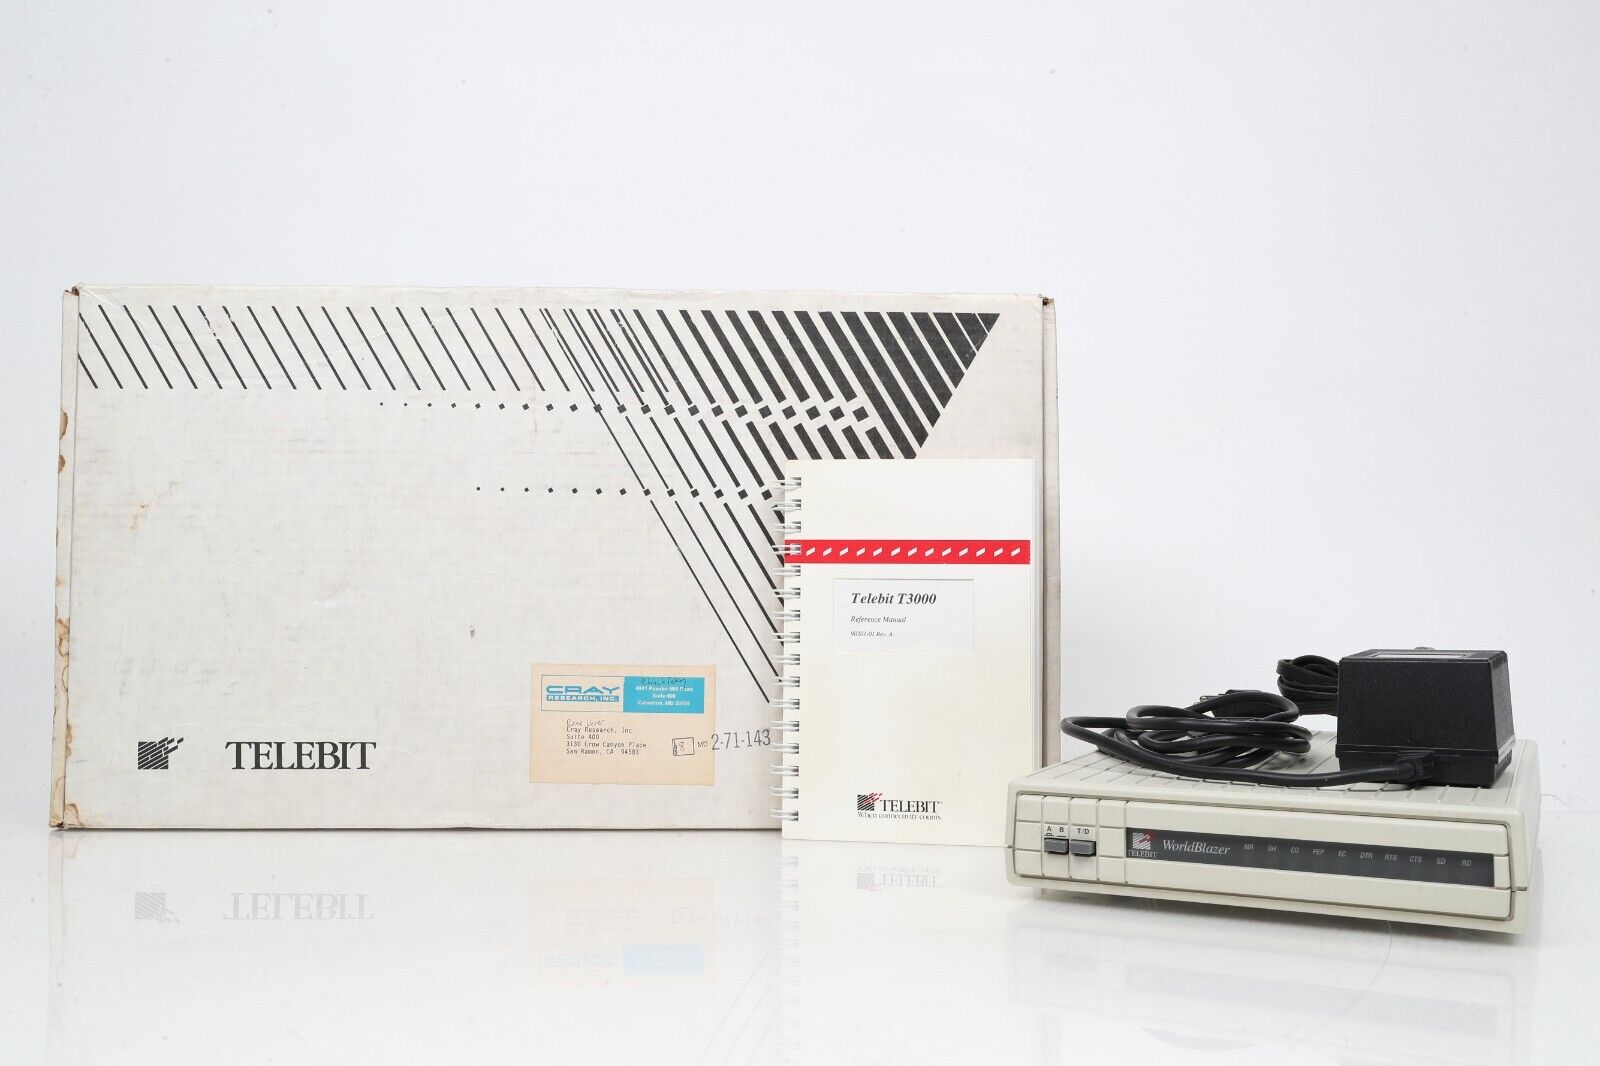 TELEBIT T3000 CRAY RESEARCH INC. World Blazer with Manual in Box